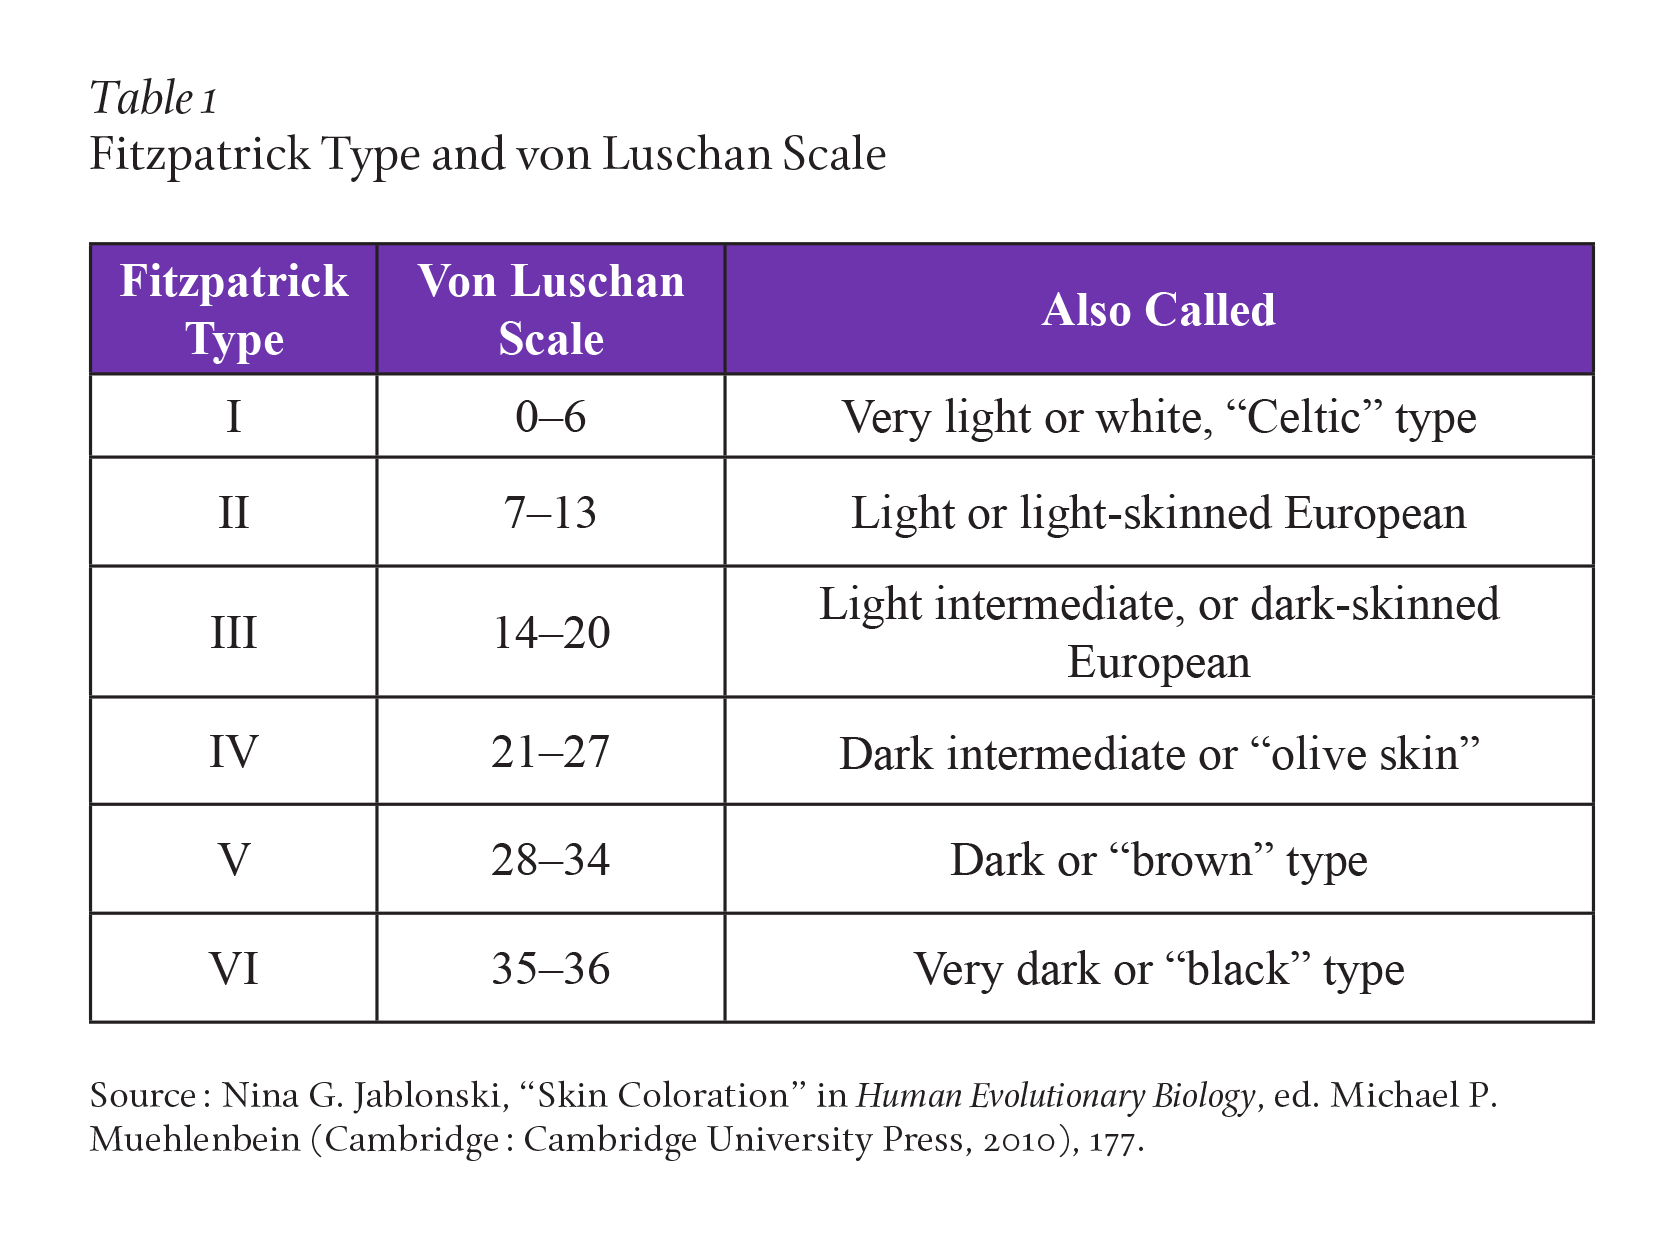 Table of Fitzpatrick Type and von Luschan Scale Values